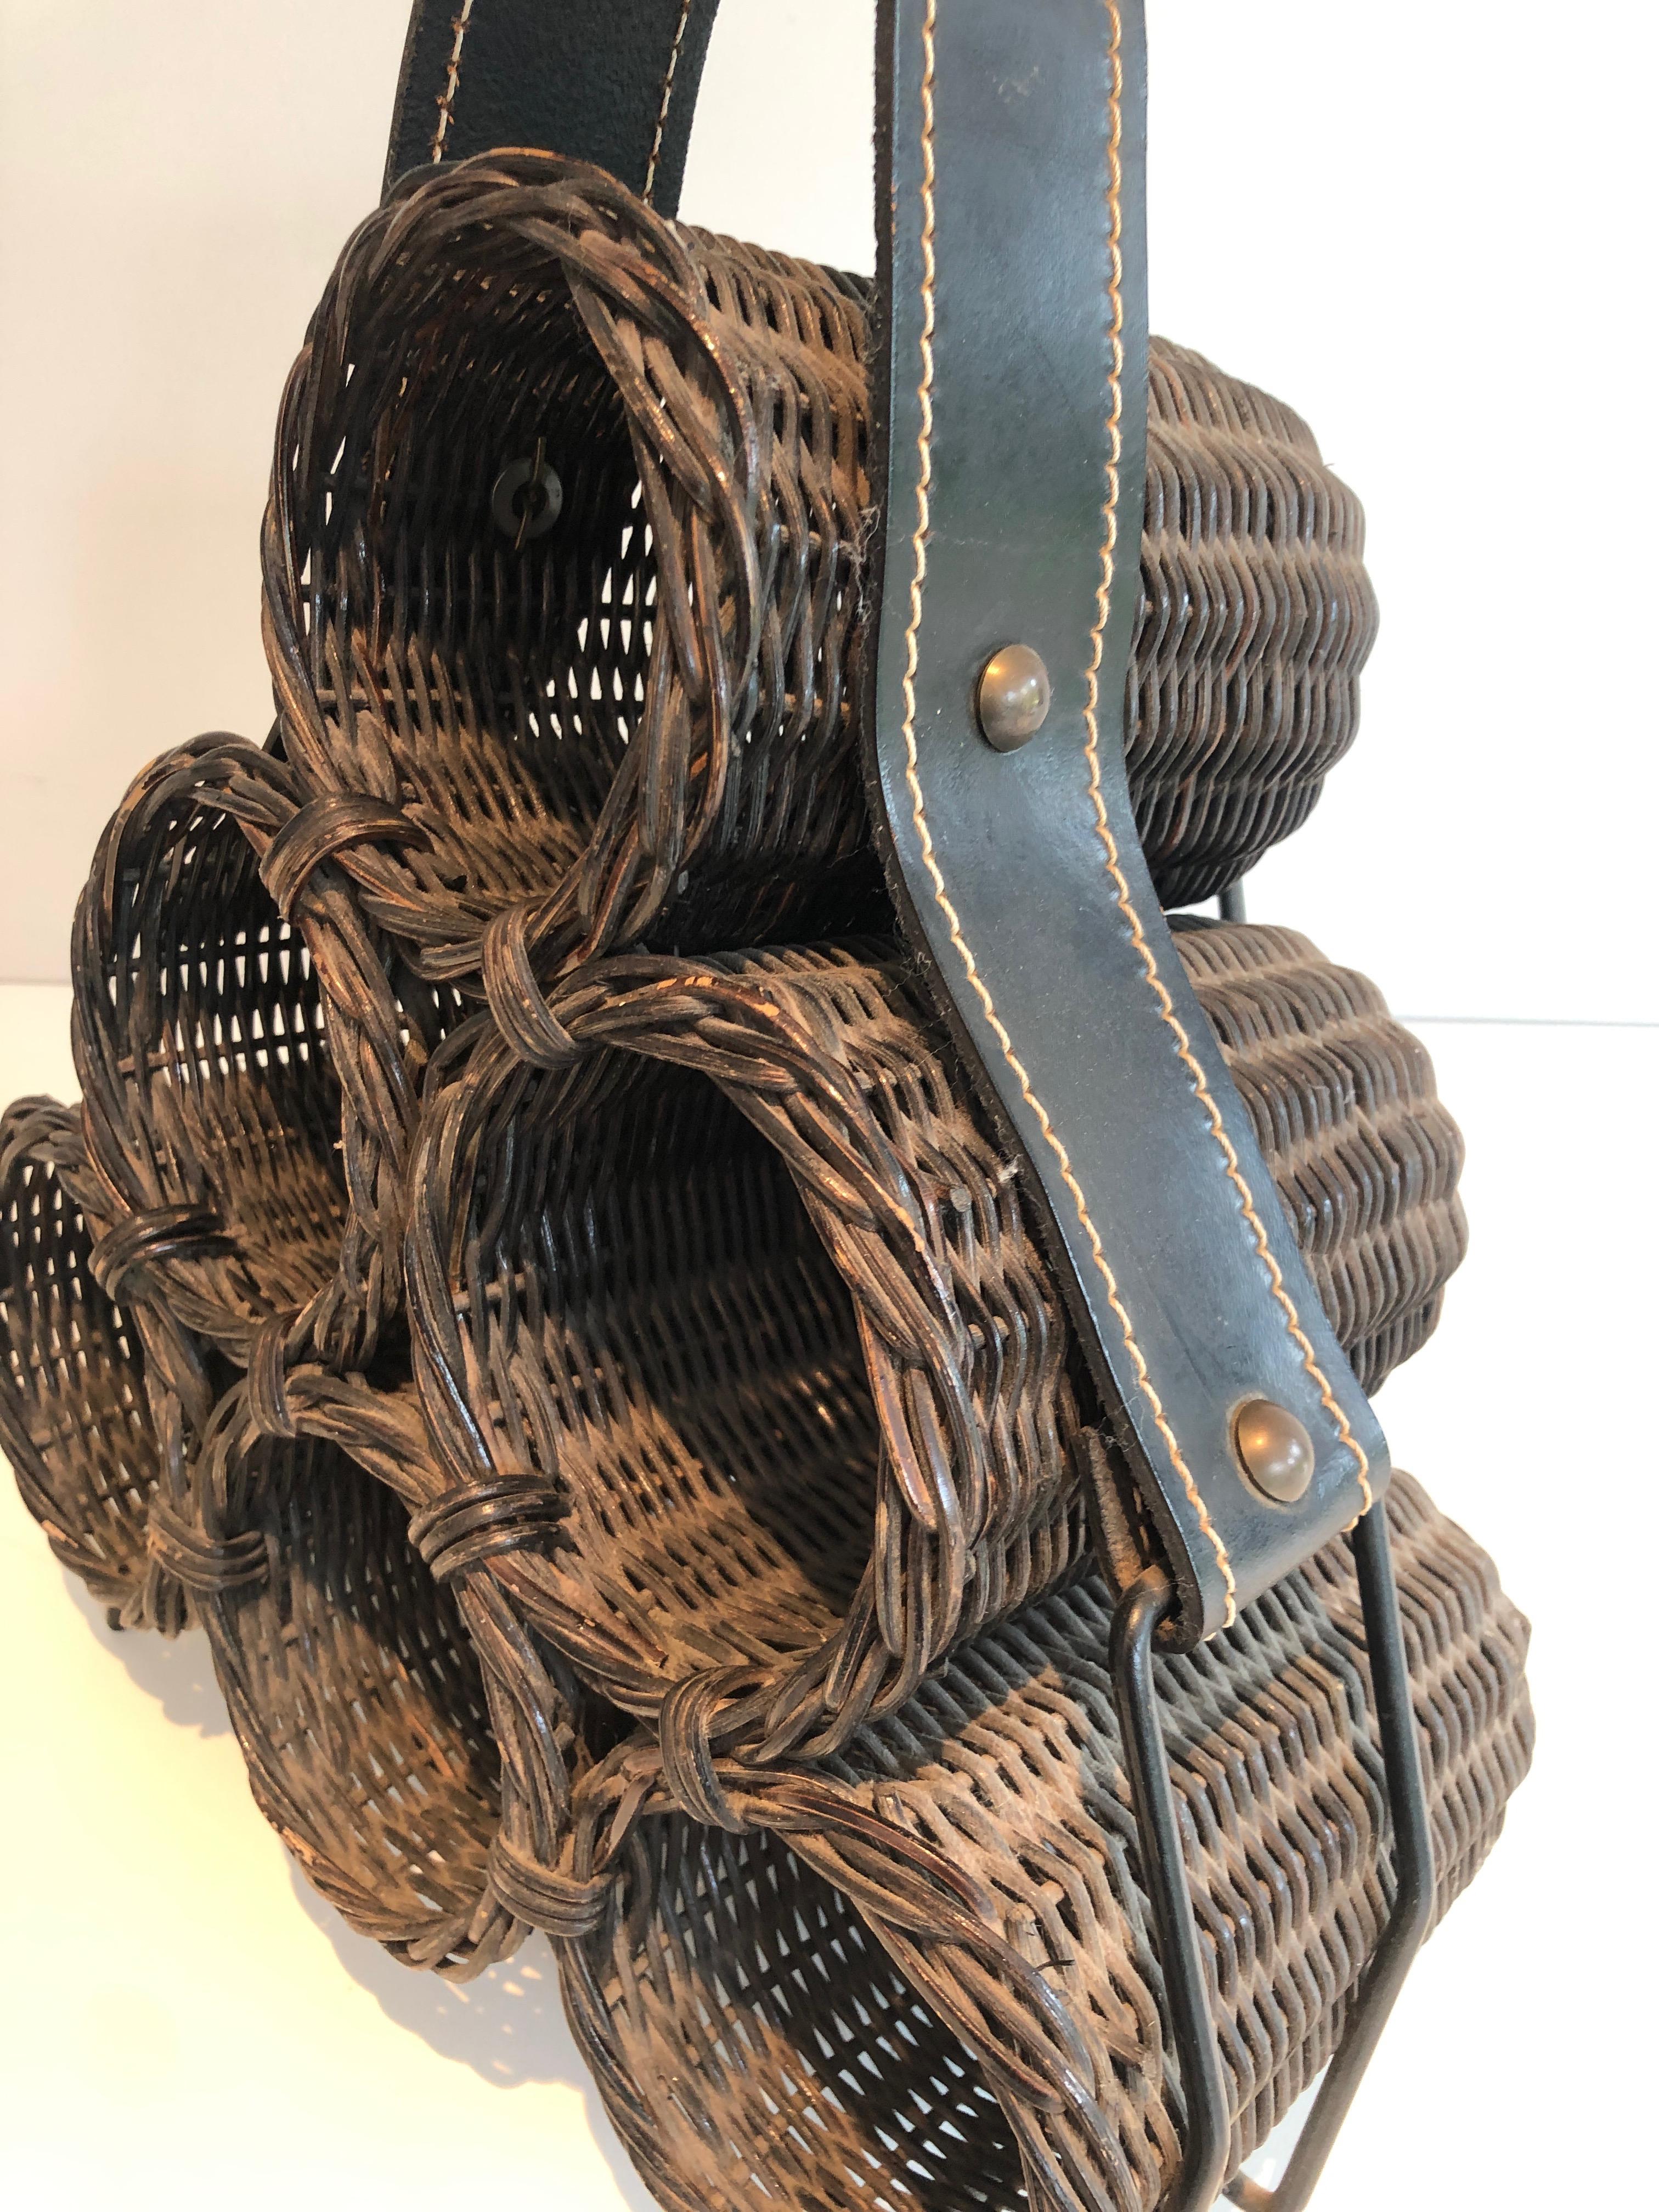 Rattan and Leather Bottles Holder, French Work, circa 1970 For Sale 3